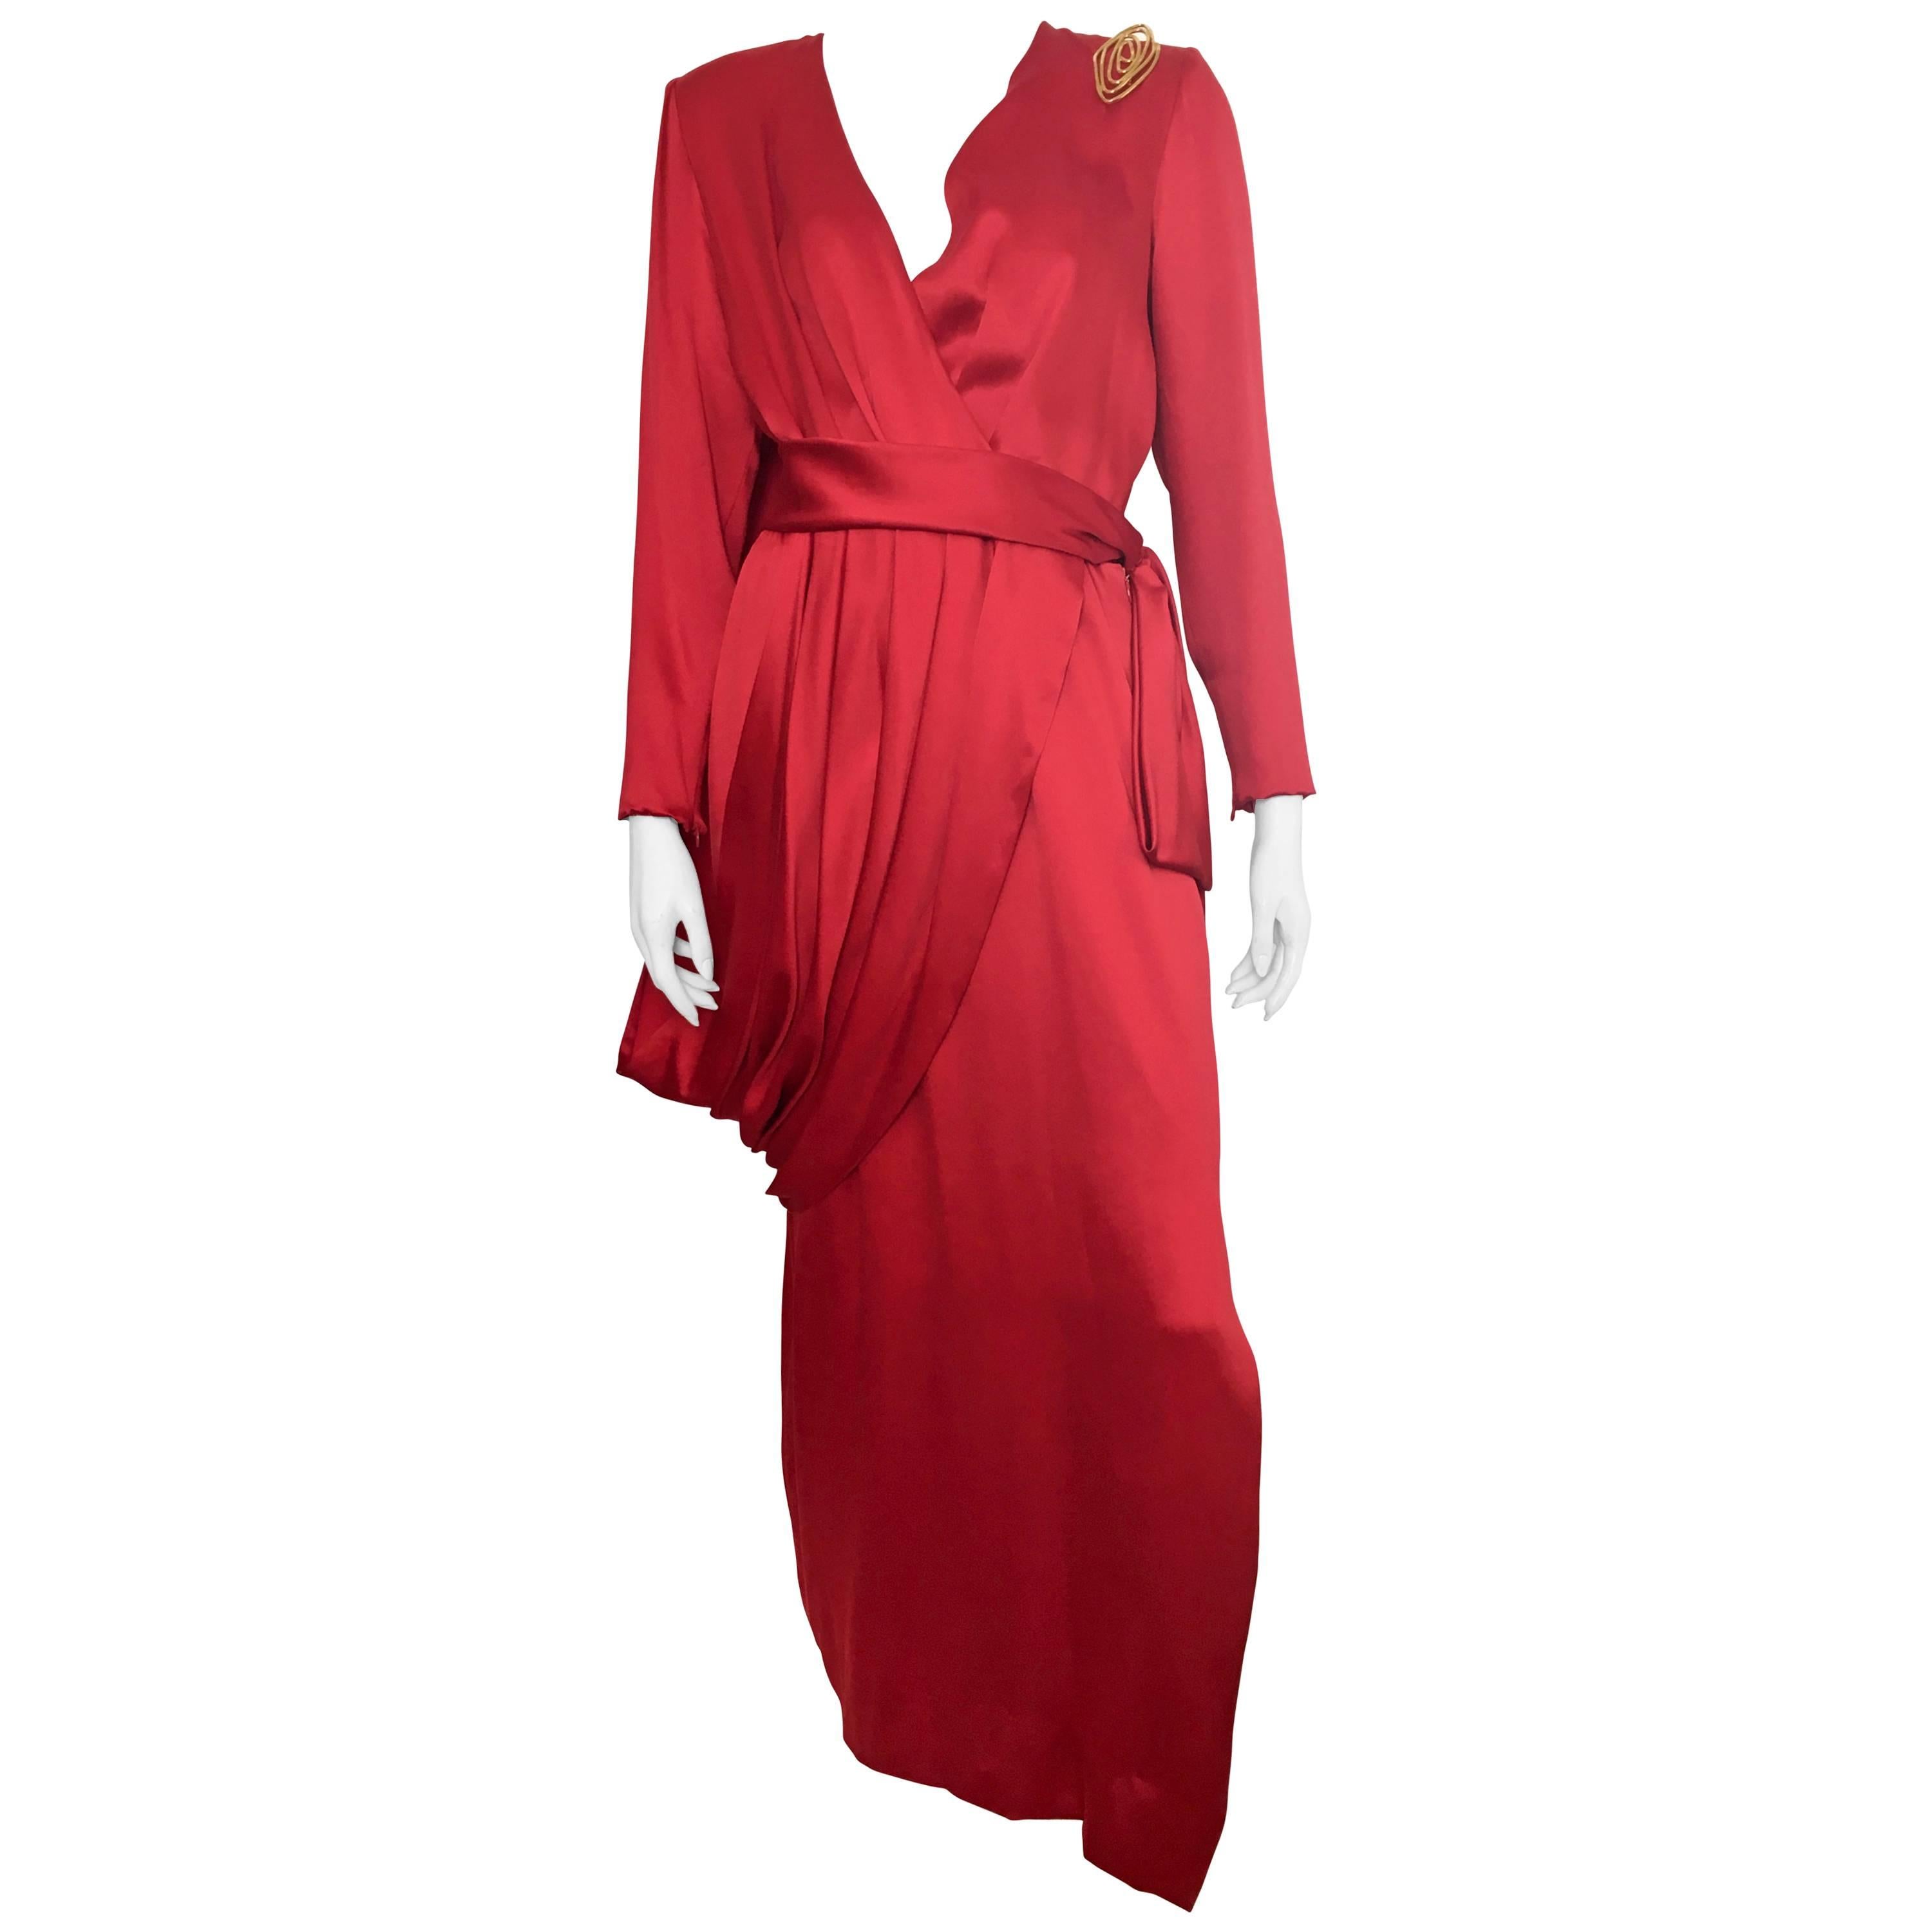 Givenchy Couture 1996 Red Silk Gown Size 10 / 42.